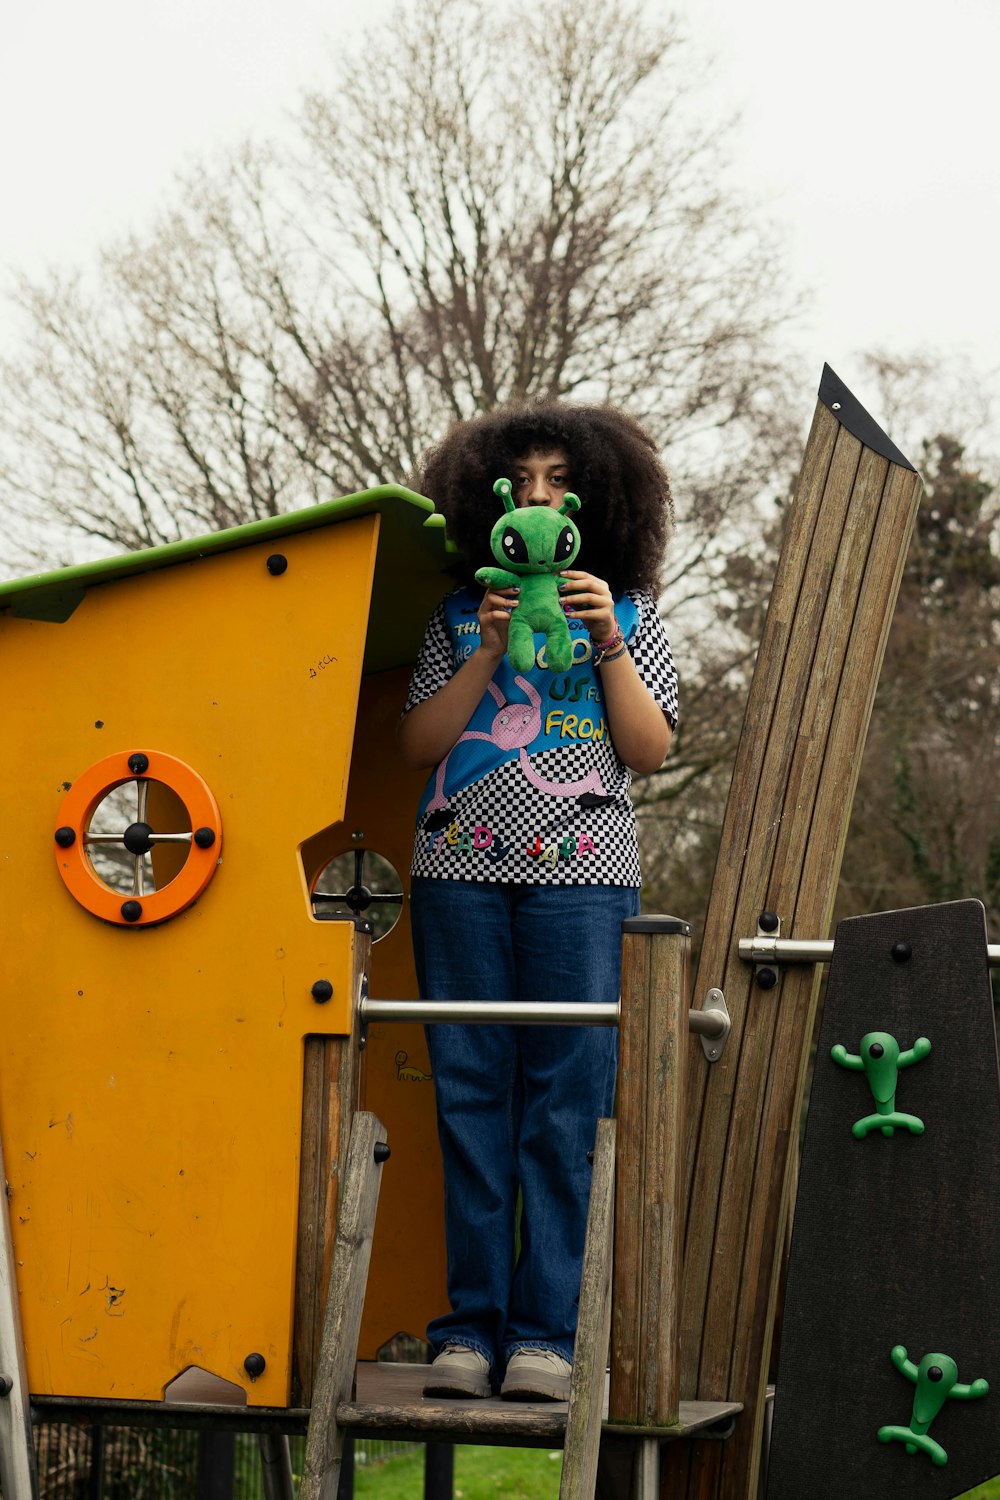 a young girl taking a picture of herself in a playground